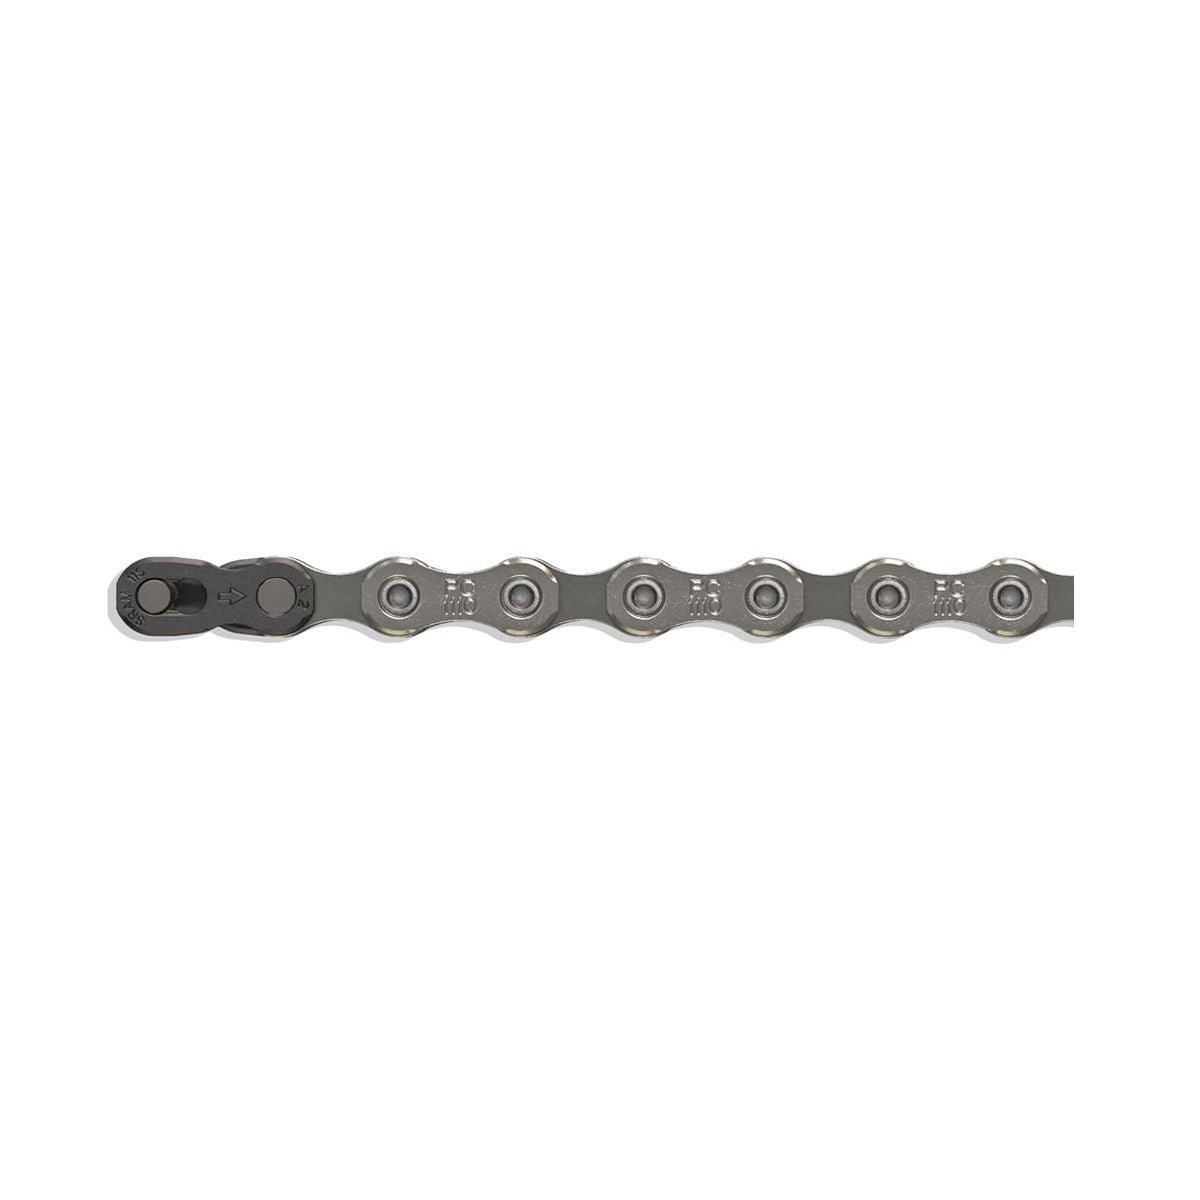 SRAM PC1110 11 Speed Solid Pin Silver Chain (with Powerlock)